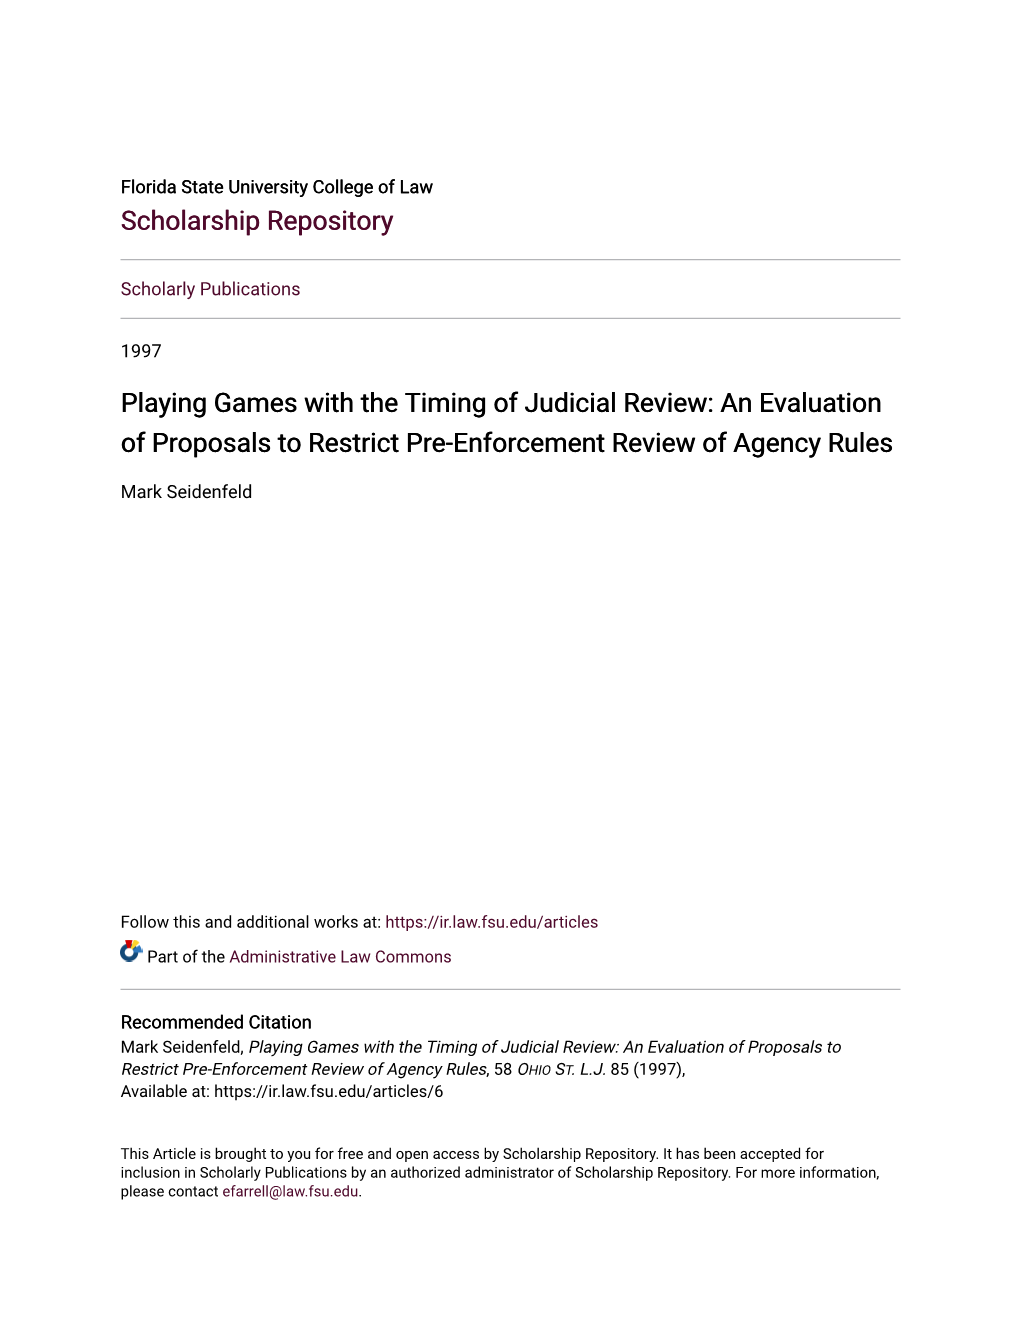 Playing Games with the Timing of Judicial Review: an Evaluation of Proposals to Restrict Pre-Enforcement Review of Agency Rules